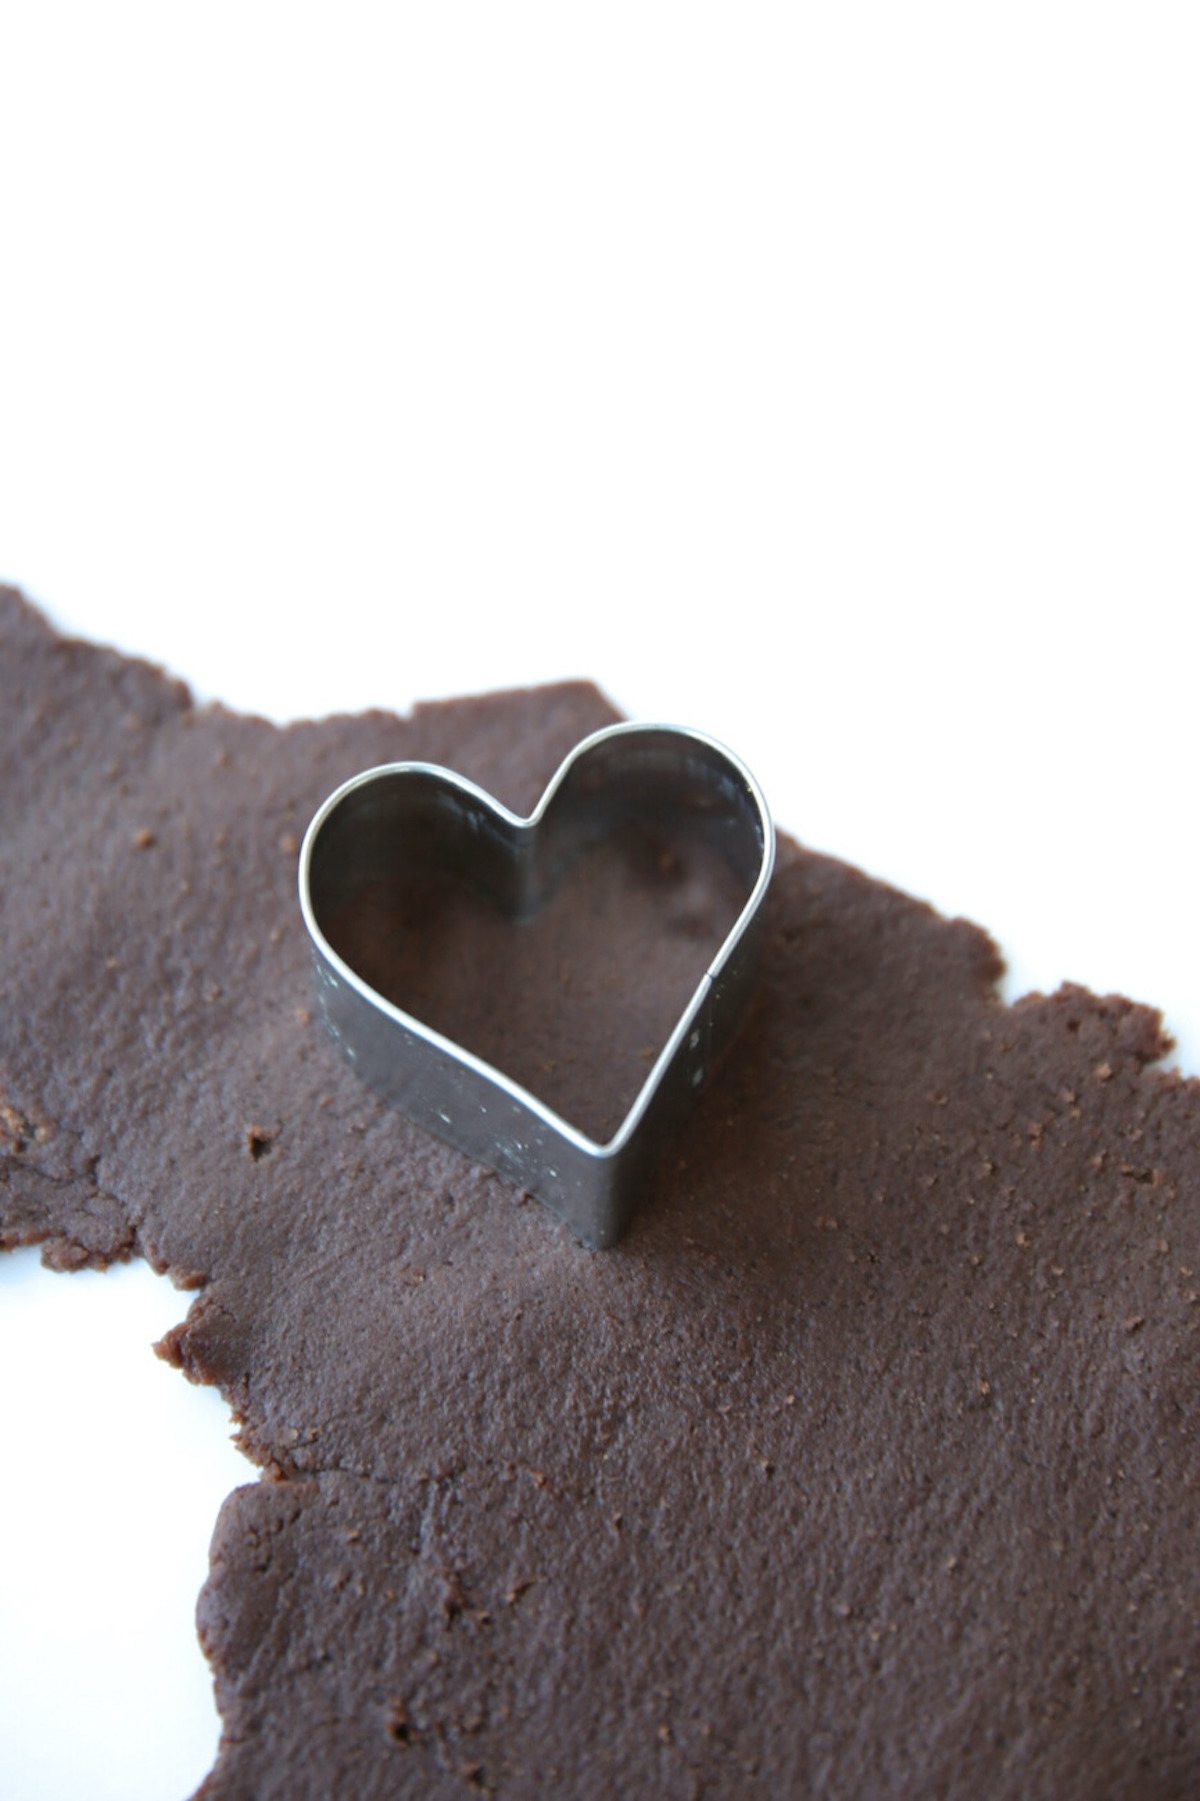 A heart shaped cookie cutter on a piece of chocolate. The chocolaty treat is reminiscent of homemade oreos.